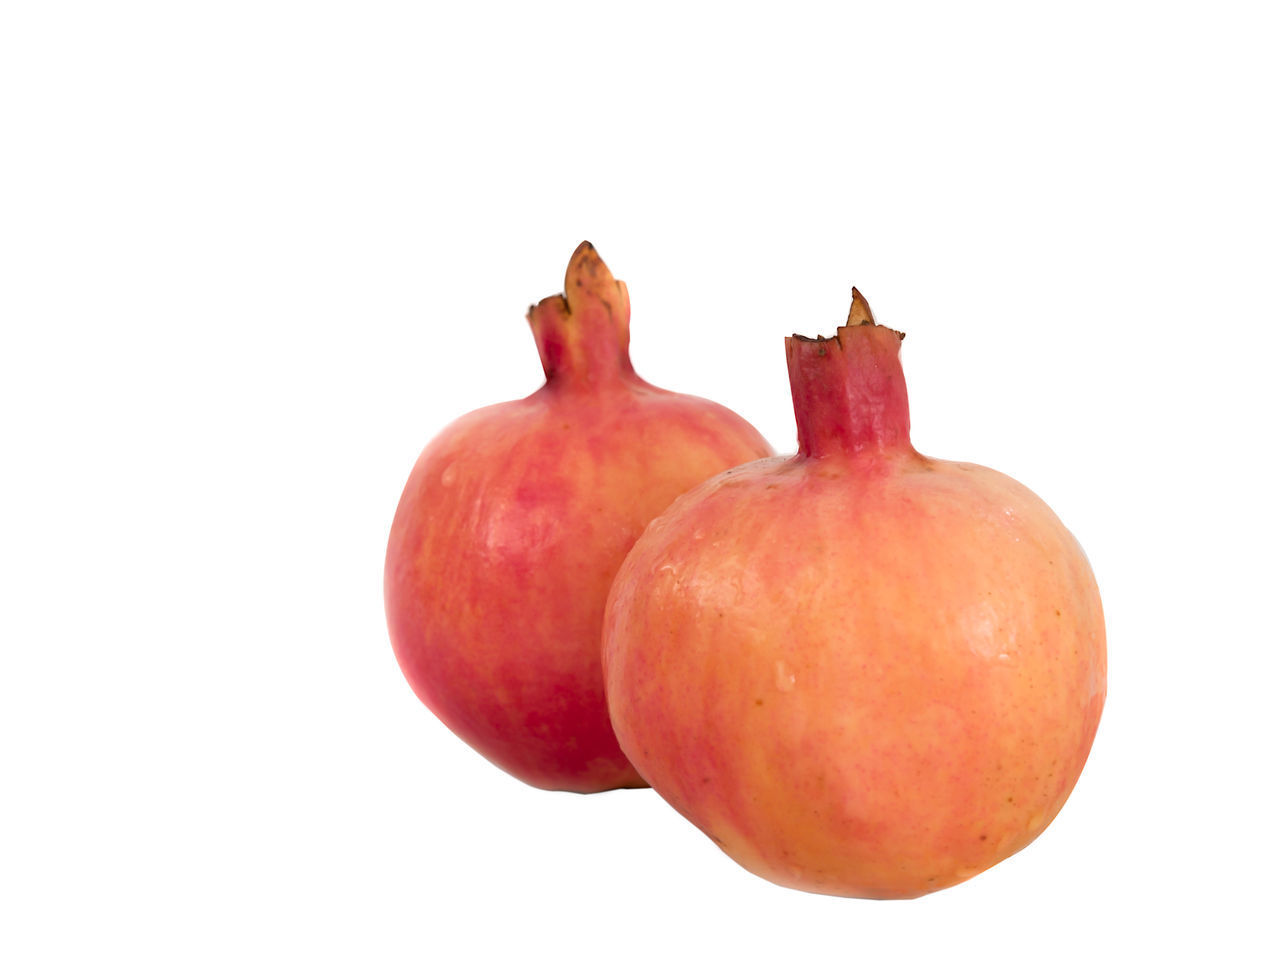 CLOSE-UP OF APPLE ON WHITE BACKGROUND